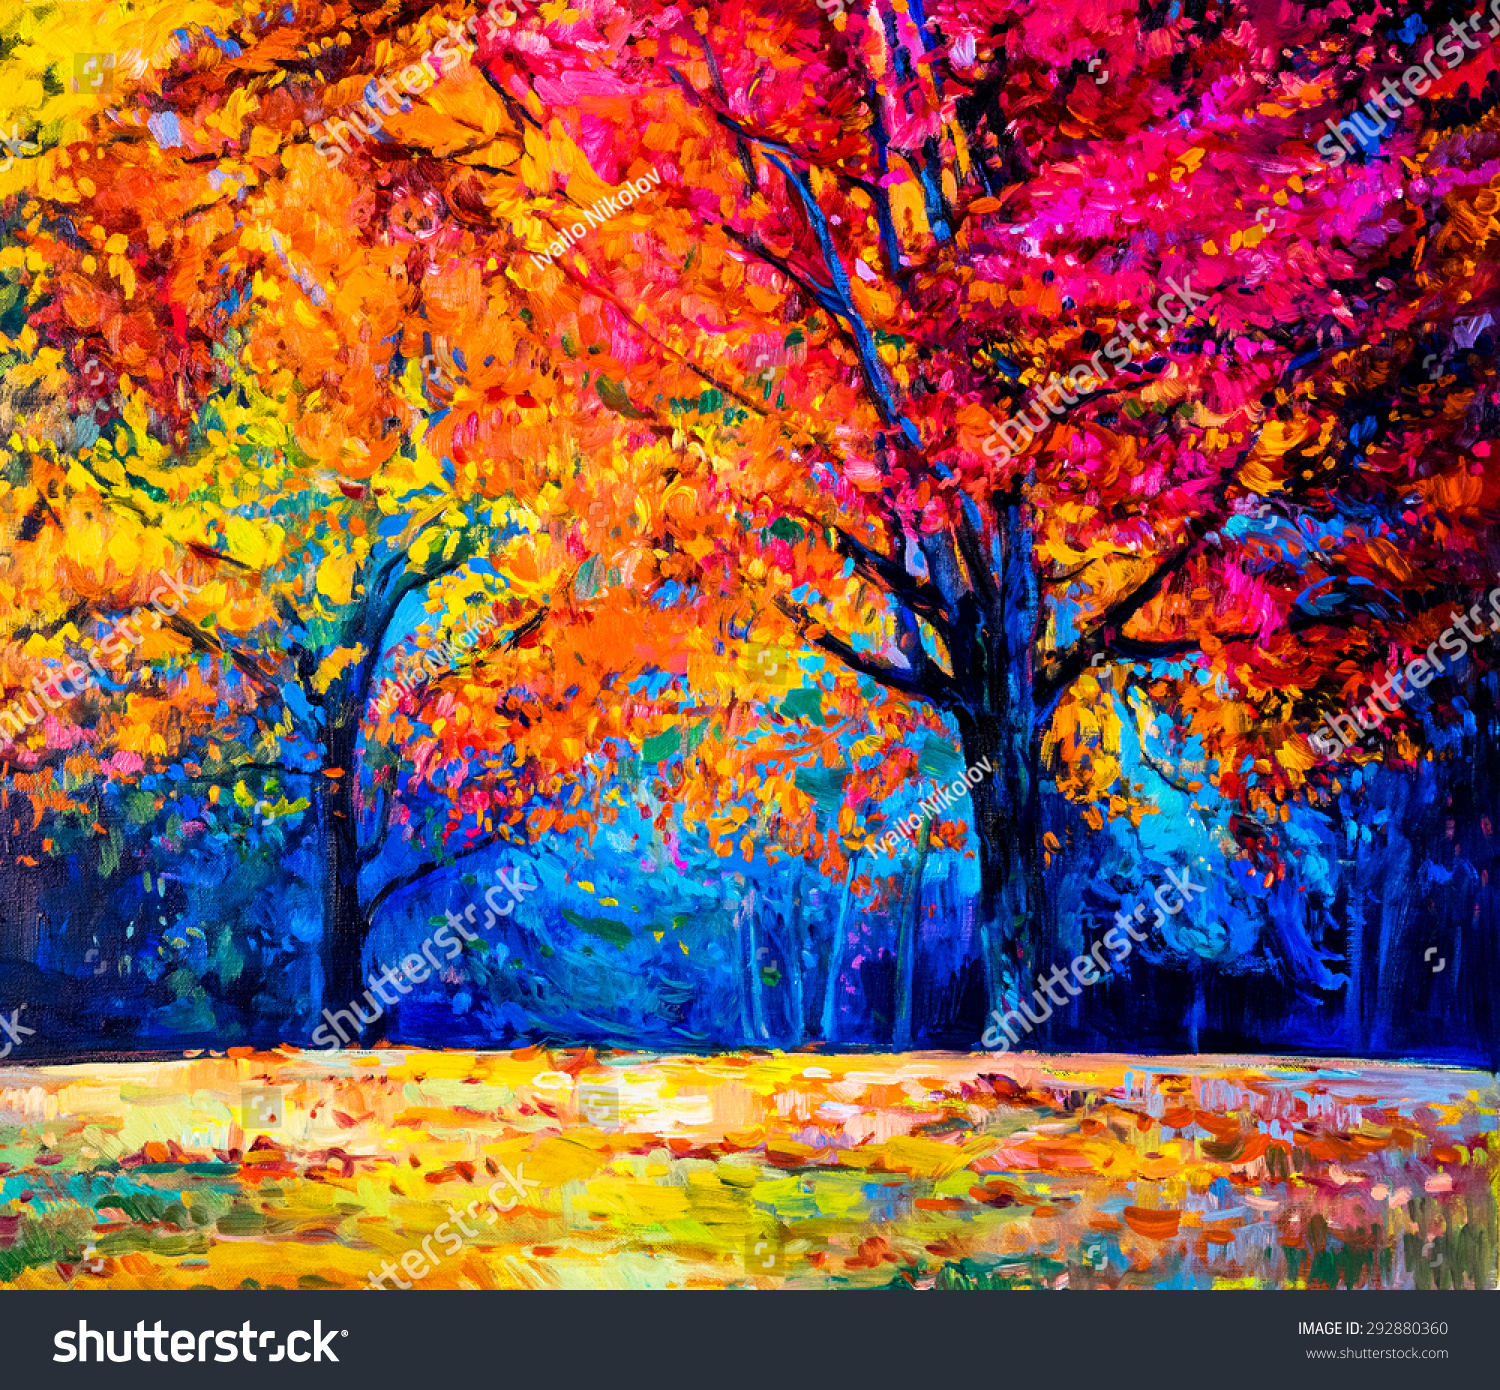 Oil Painting Landscape Colorful Autumn Trees Stock Illustration 292880360